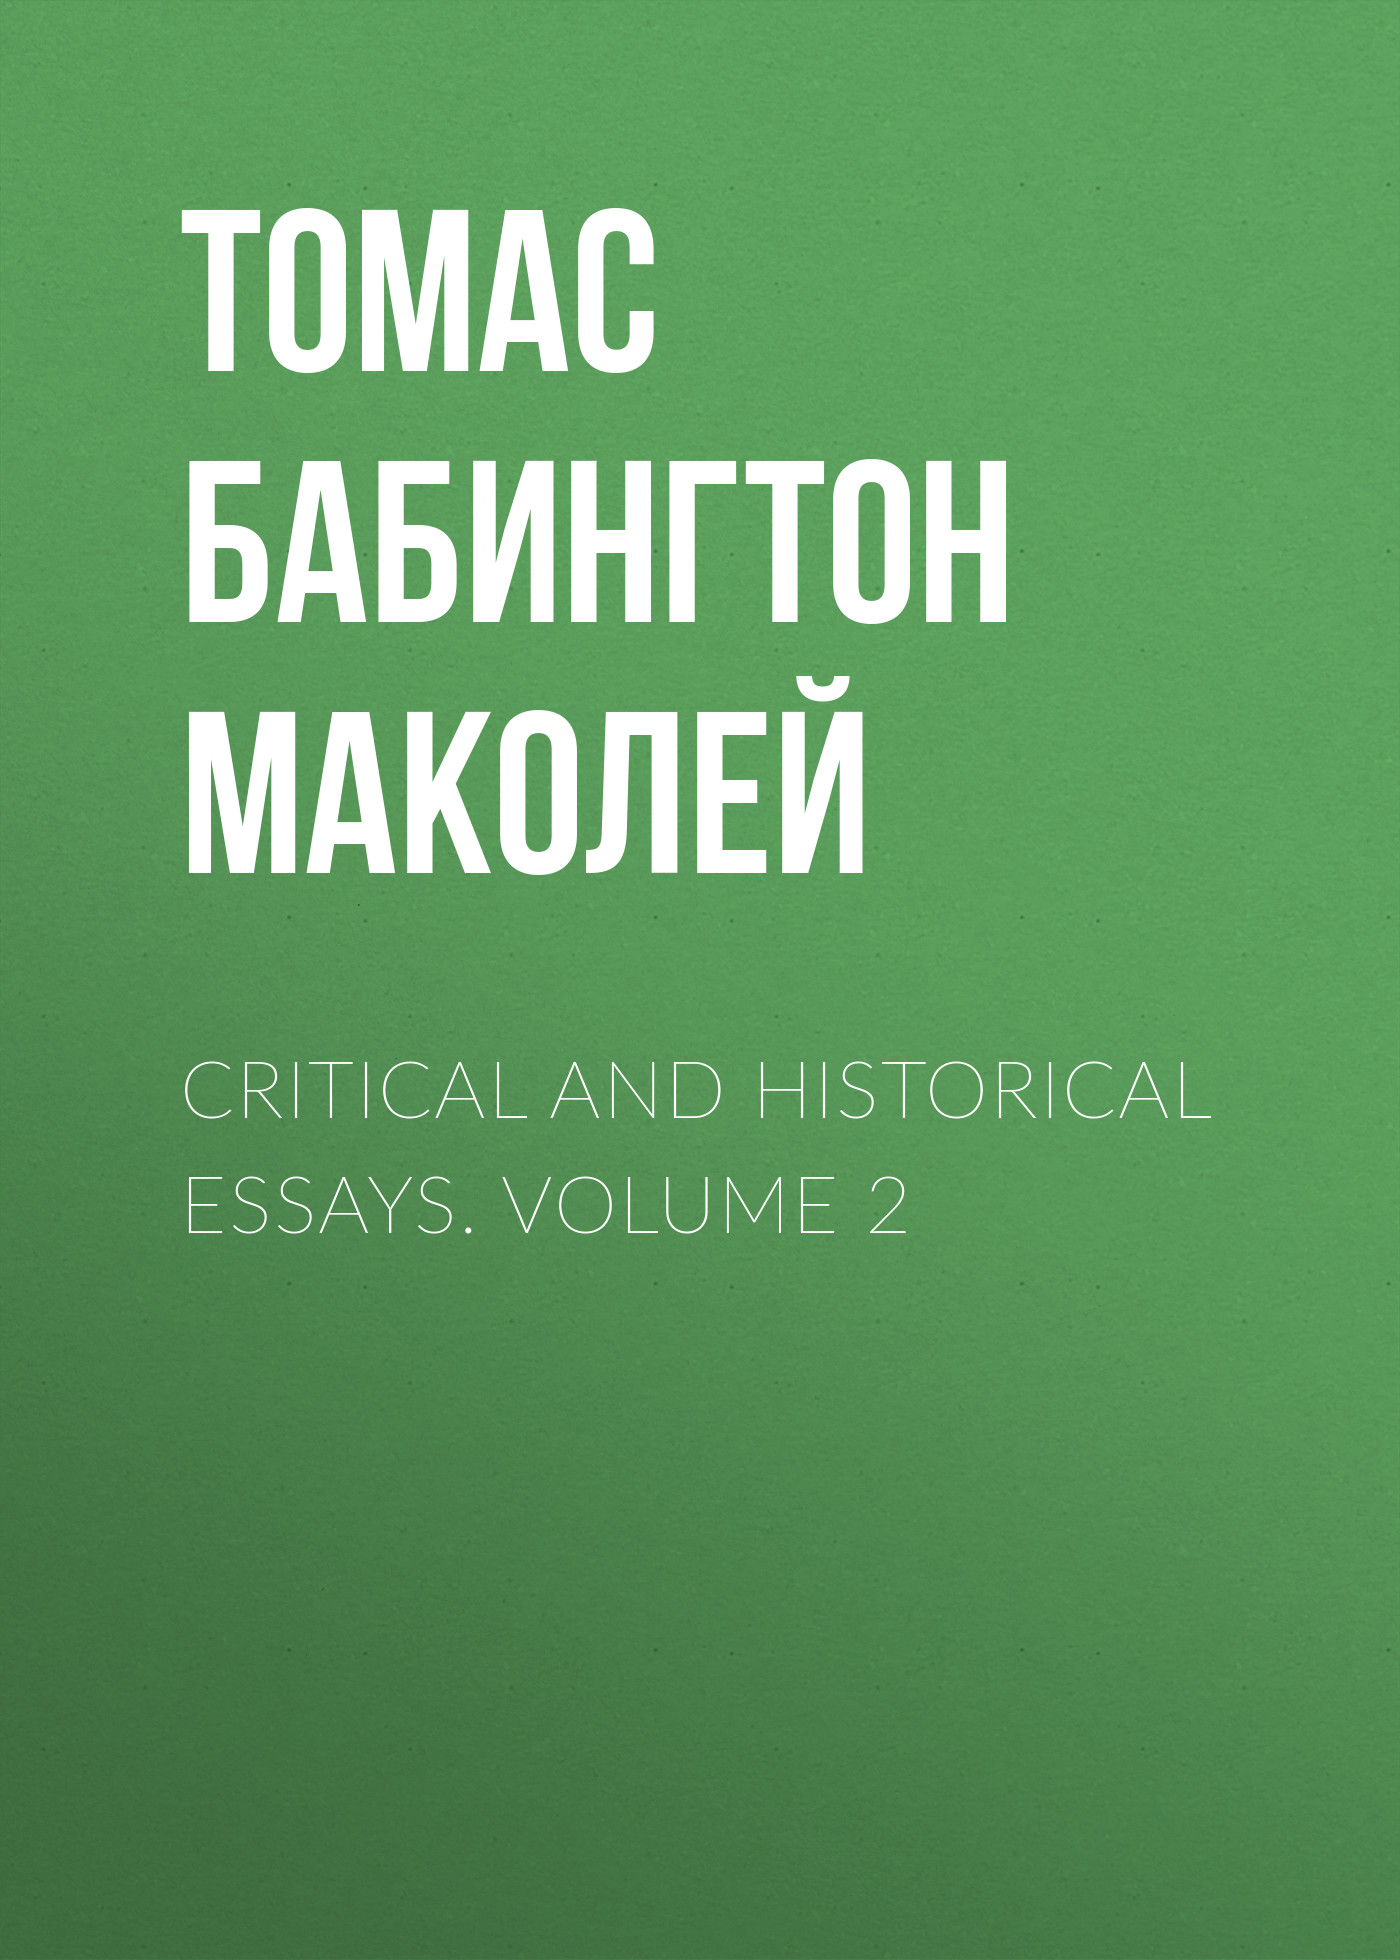 Critical and Historical Essays. Volume 2